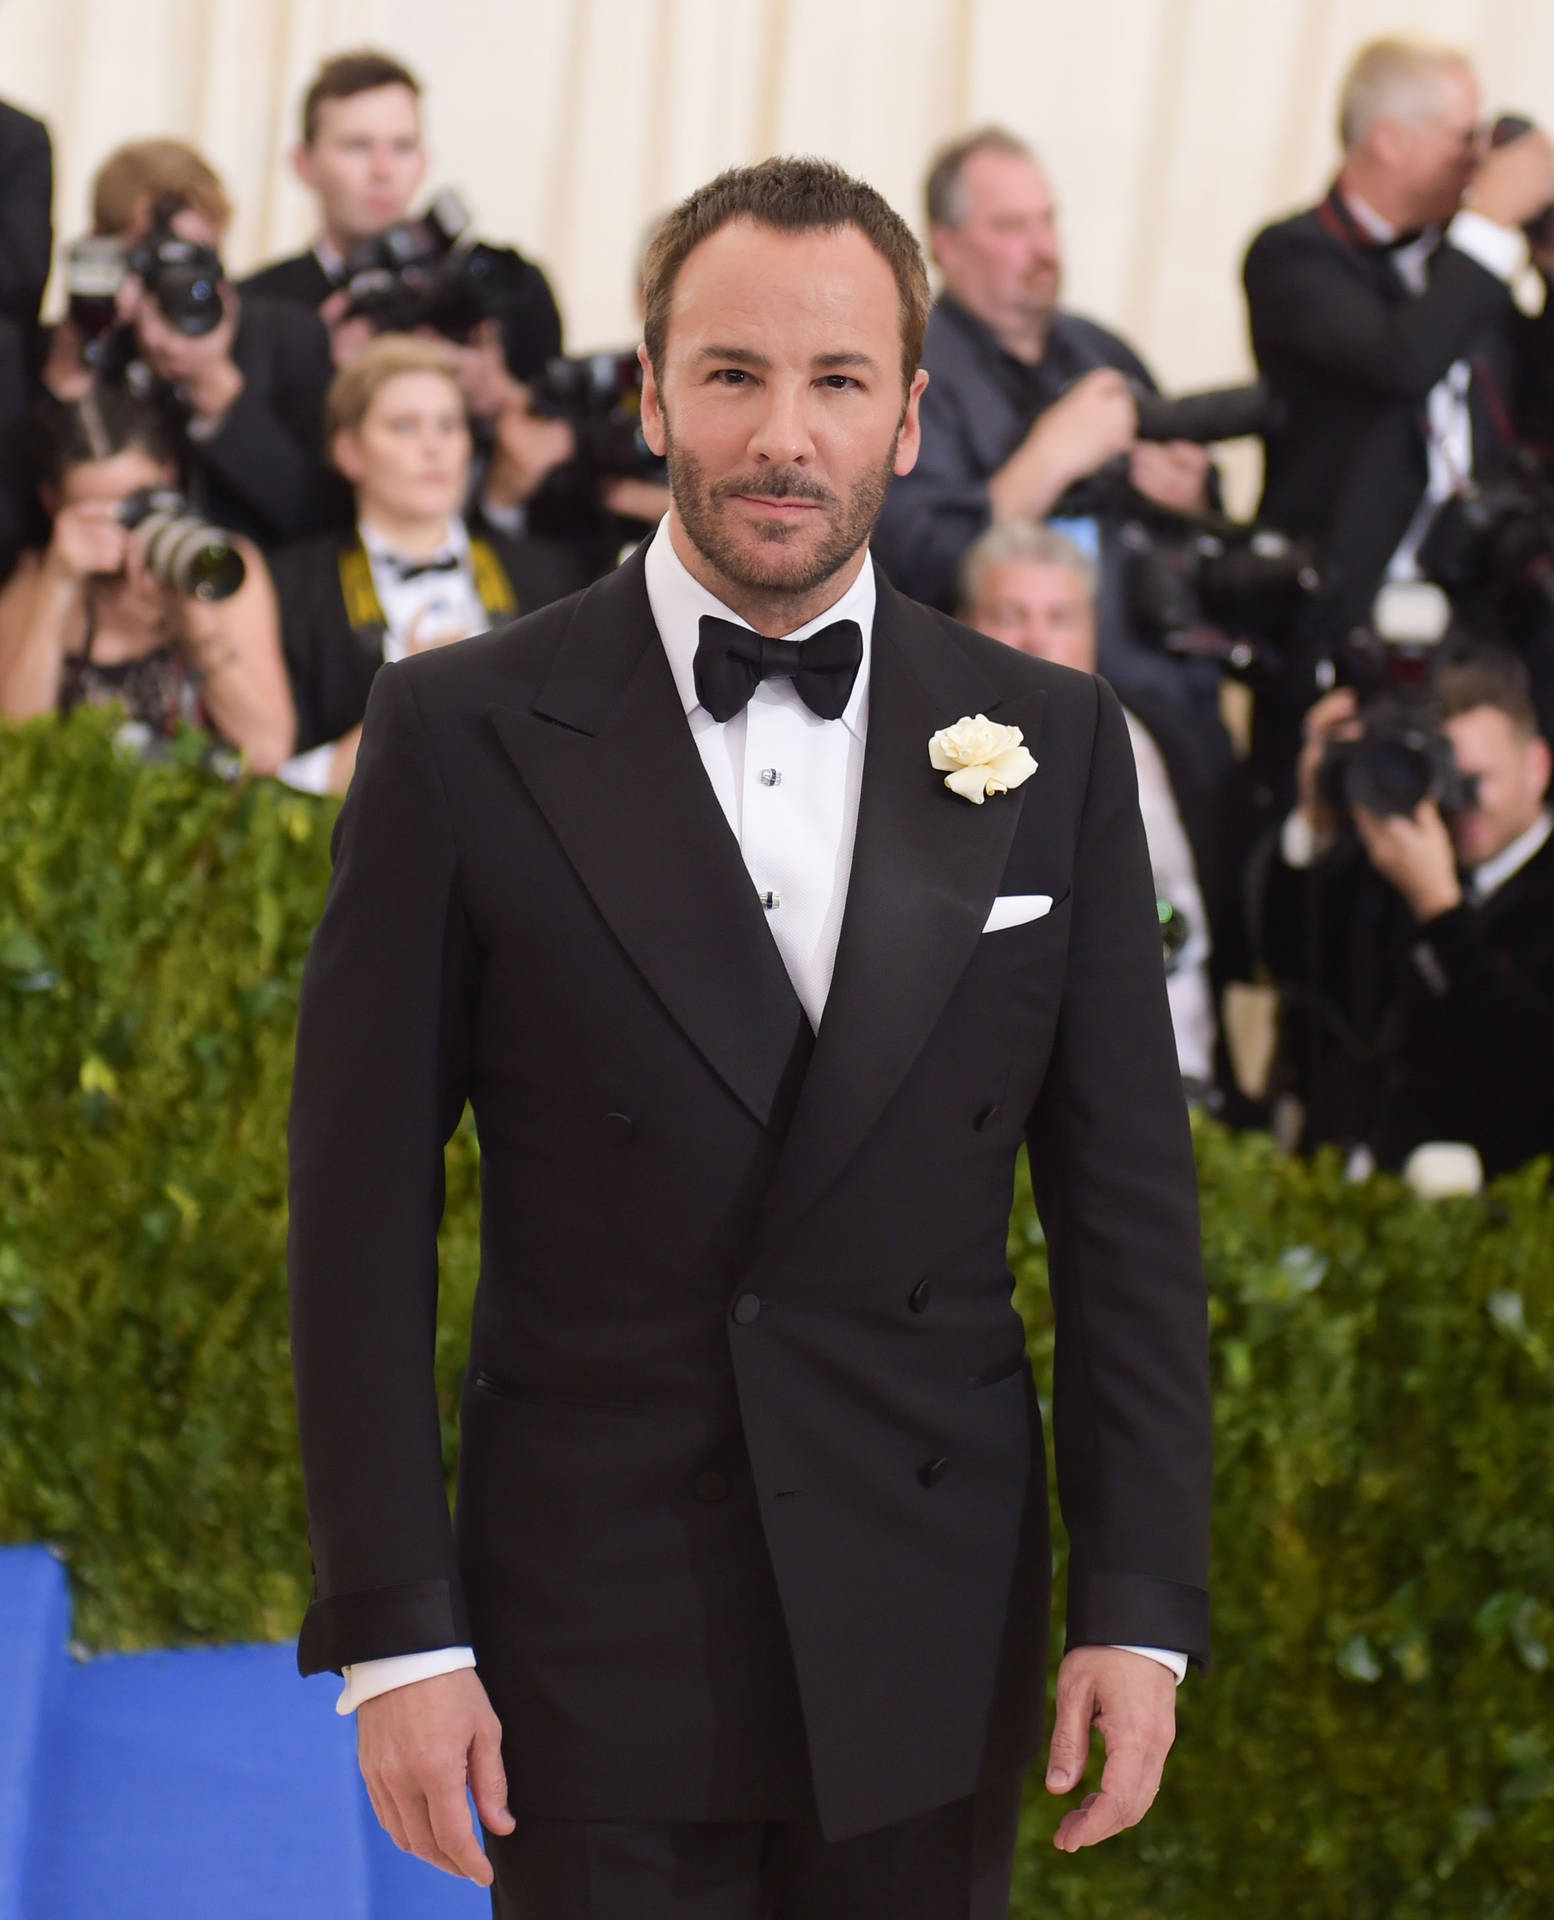 Tom Ford With Bowtie Wallpaper